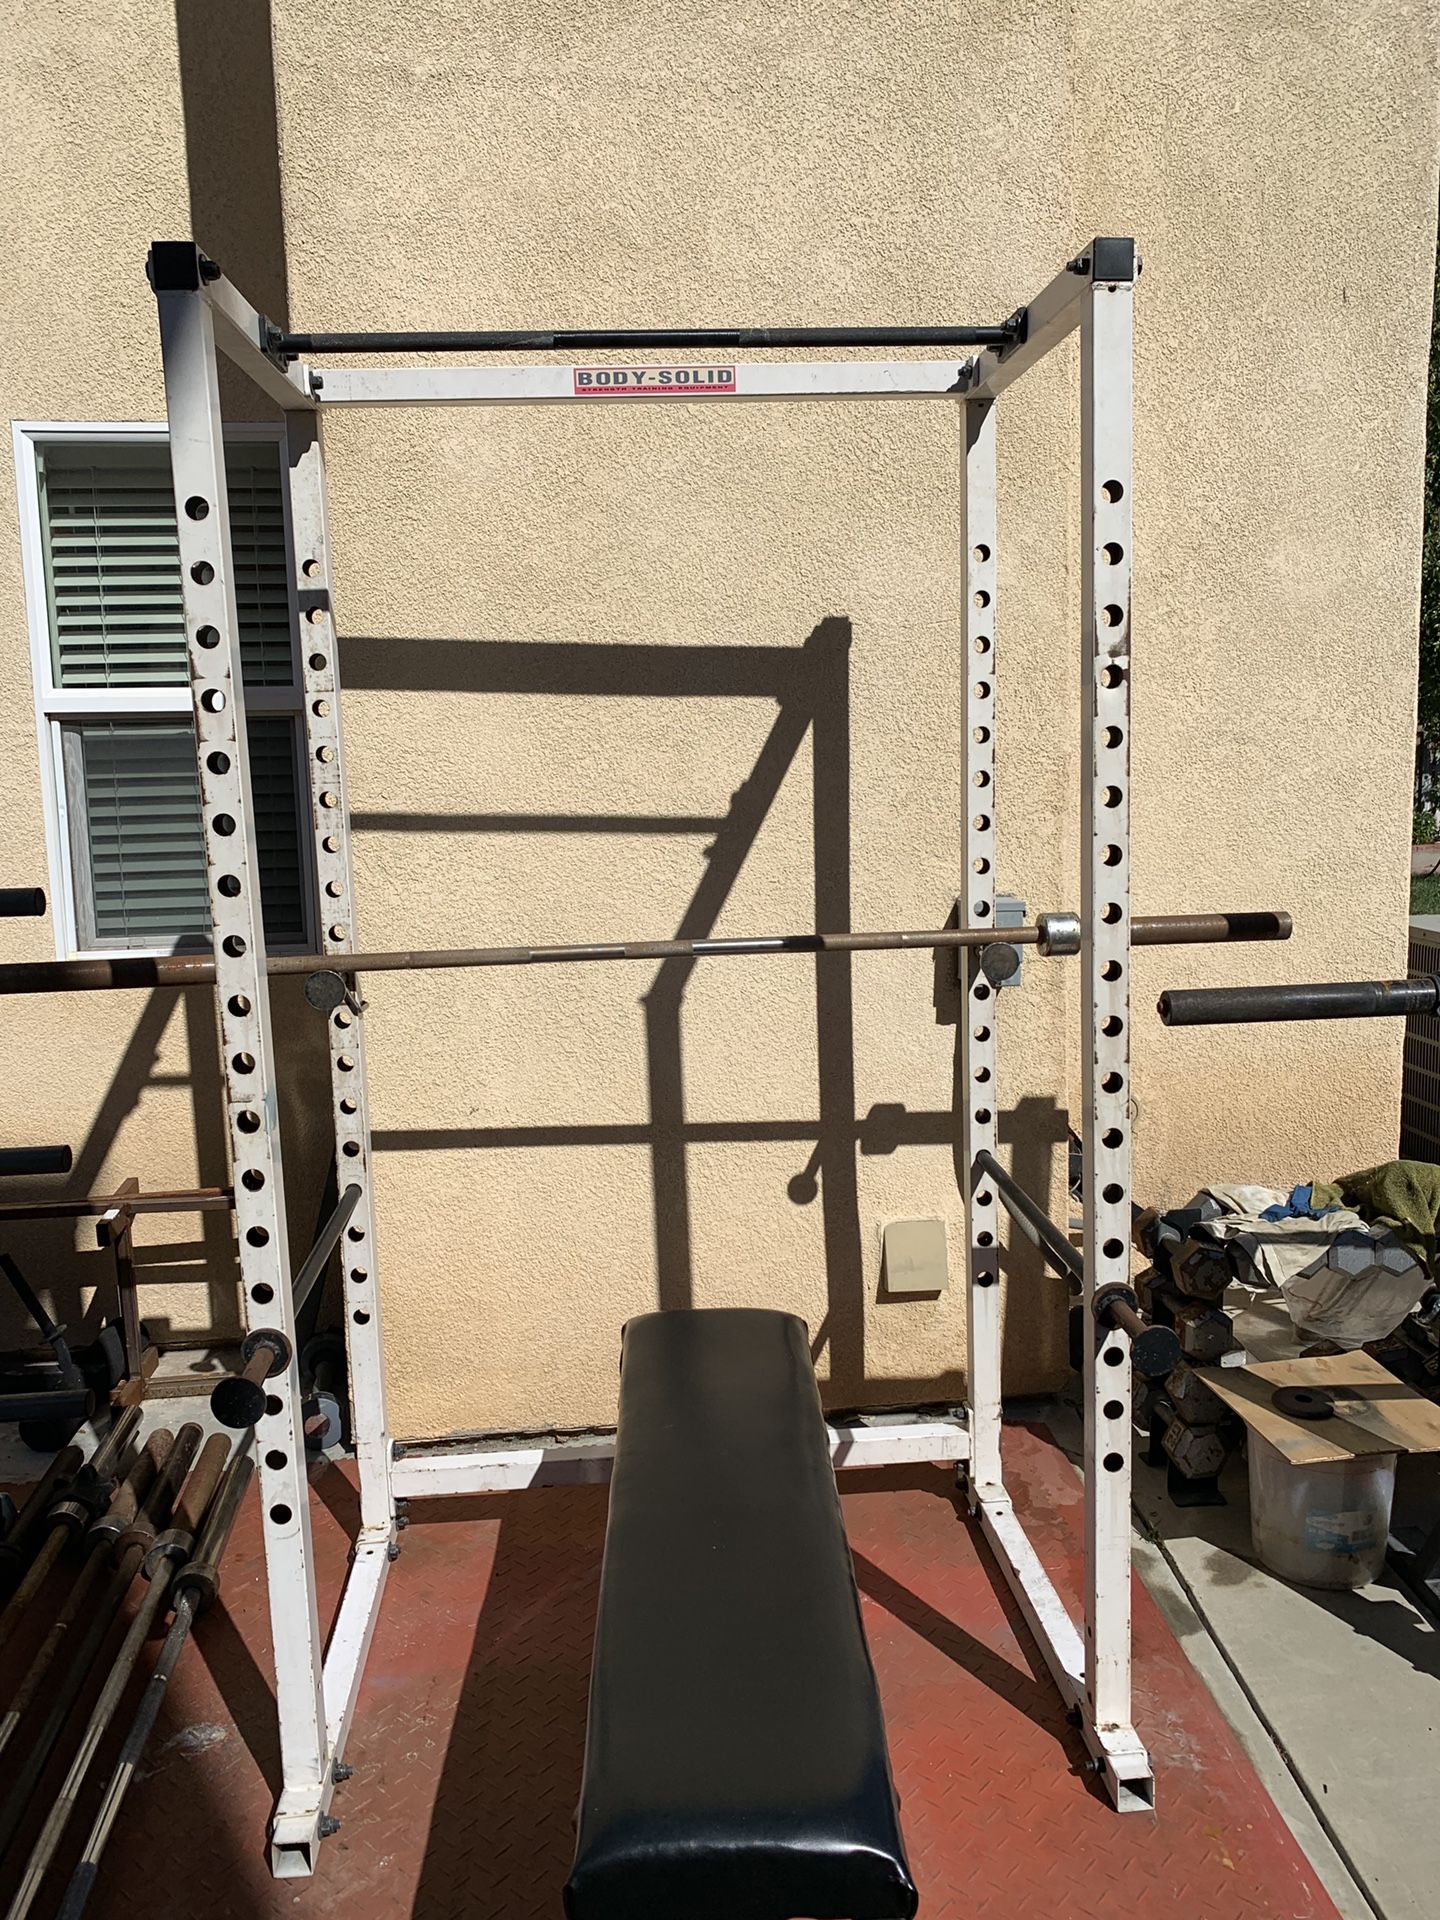 Body solid squat rack, weights plates, bar and clips